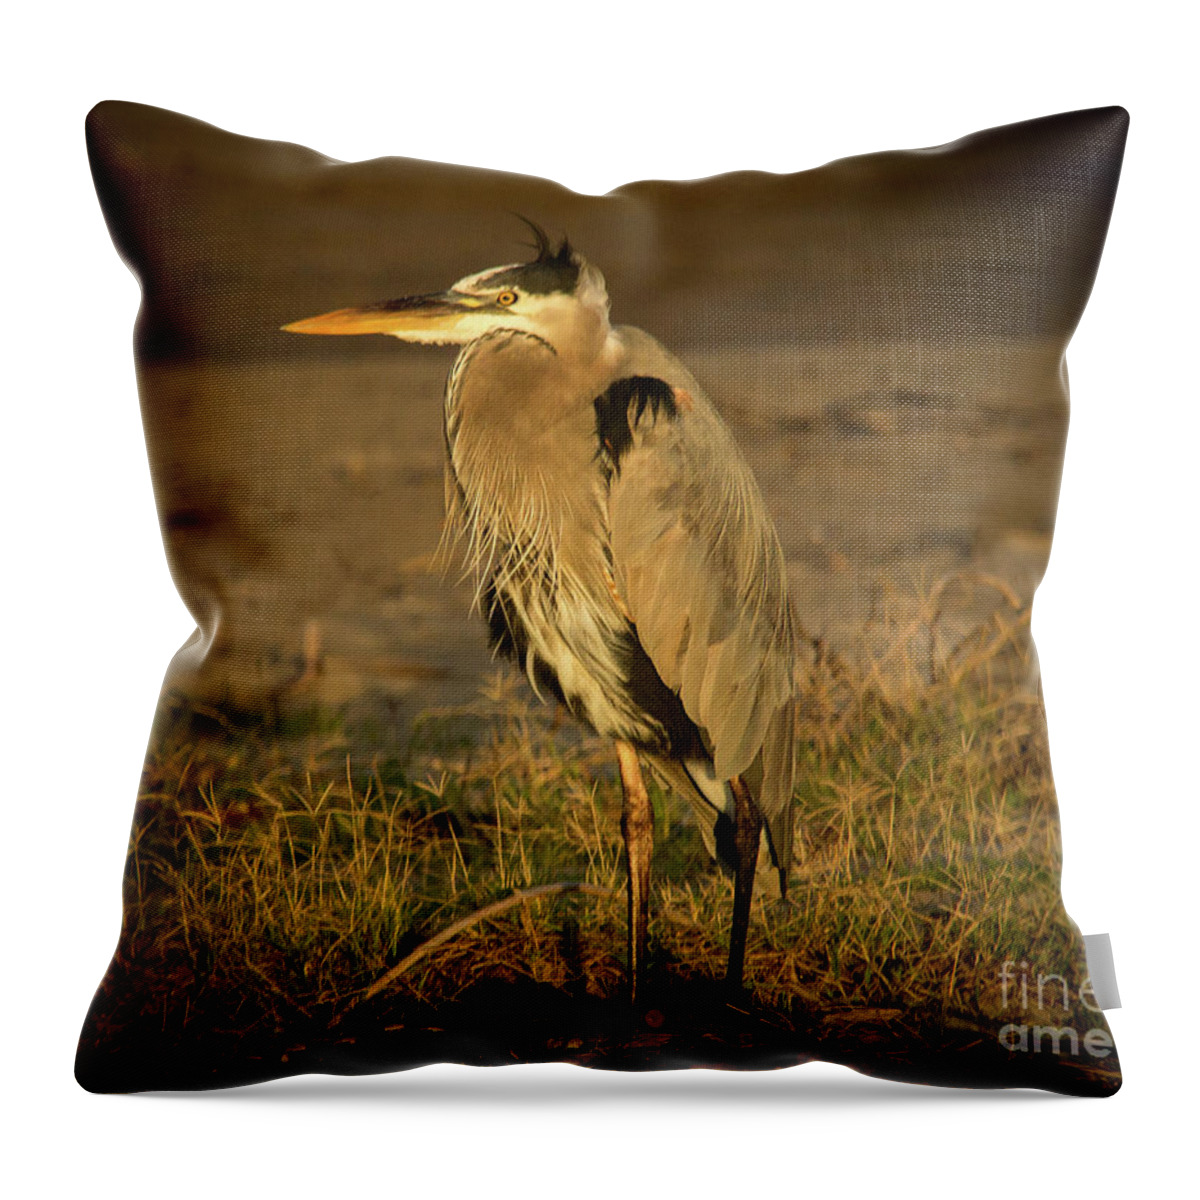 2016 Throw Pillow featuring the photograph I Know They are Coming Wildlife Art by Kaylyn Franks by Kaylyn Franks